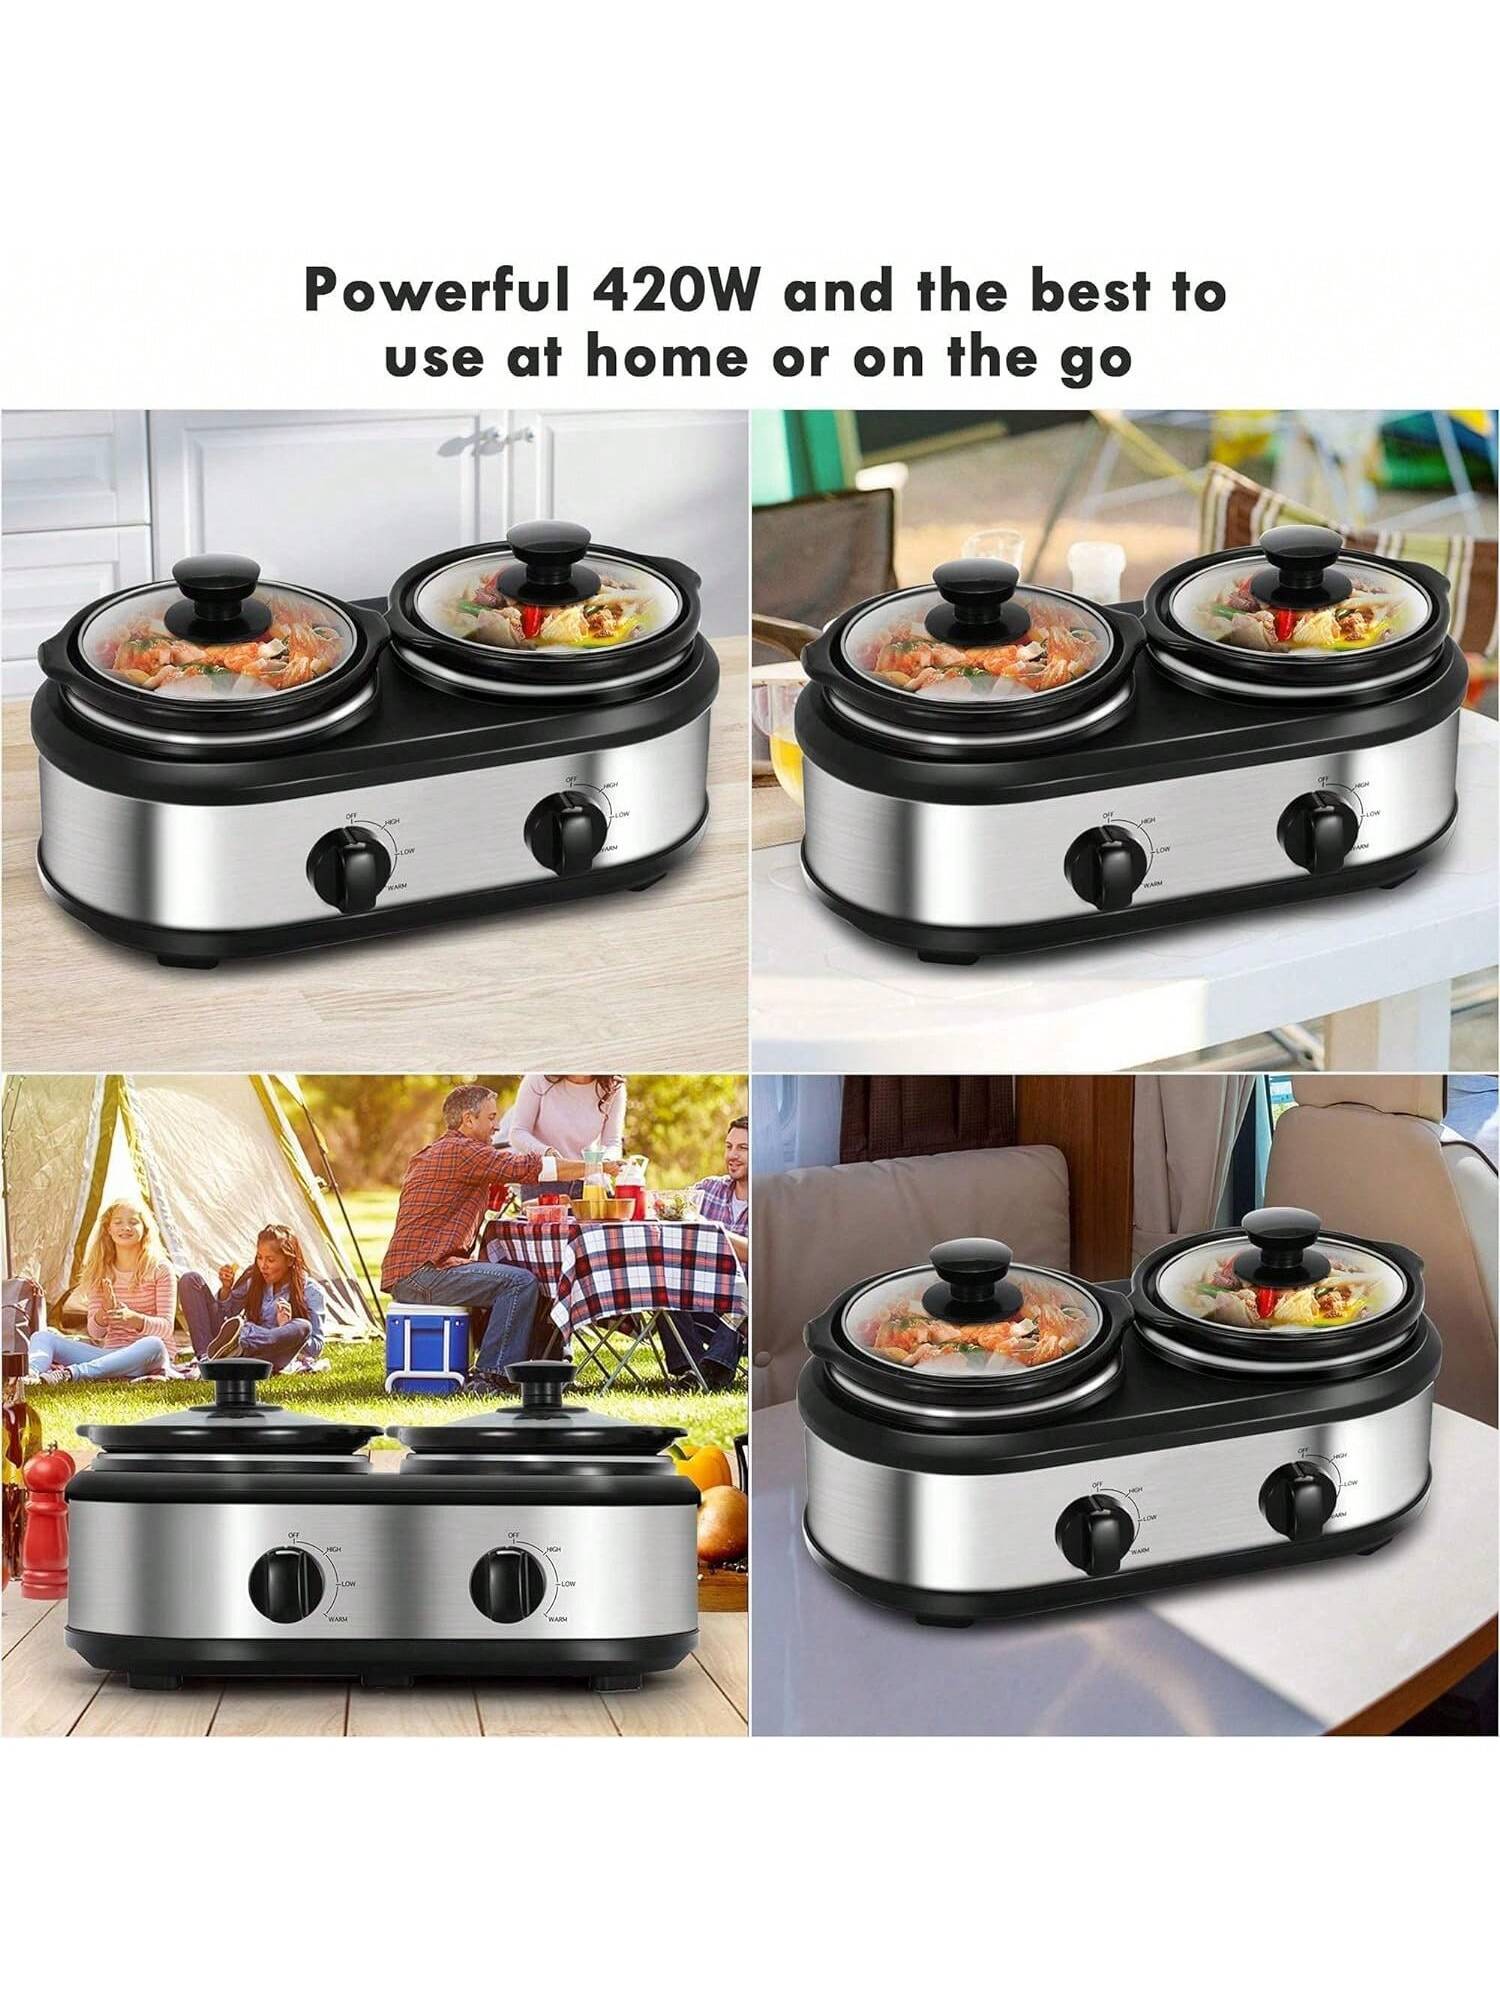 Small Double Slow Cooker, 2 Pot 1.25 Quart Oval Crock Food Warmer